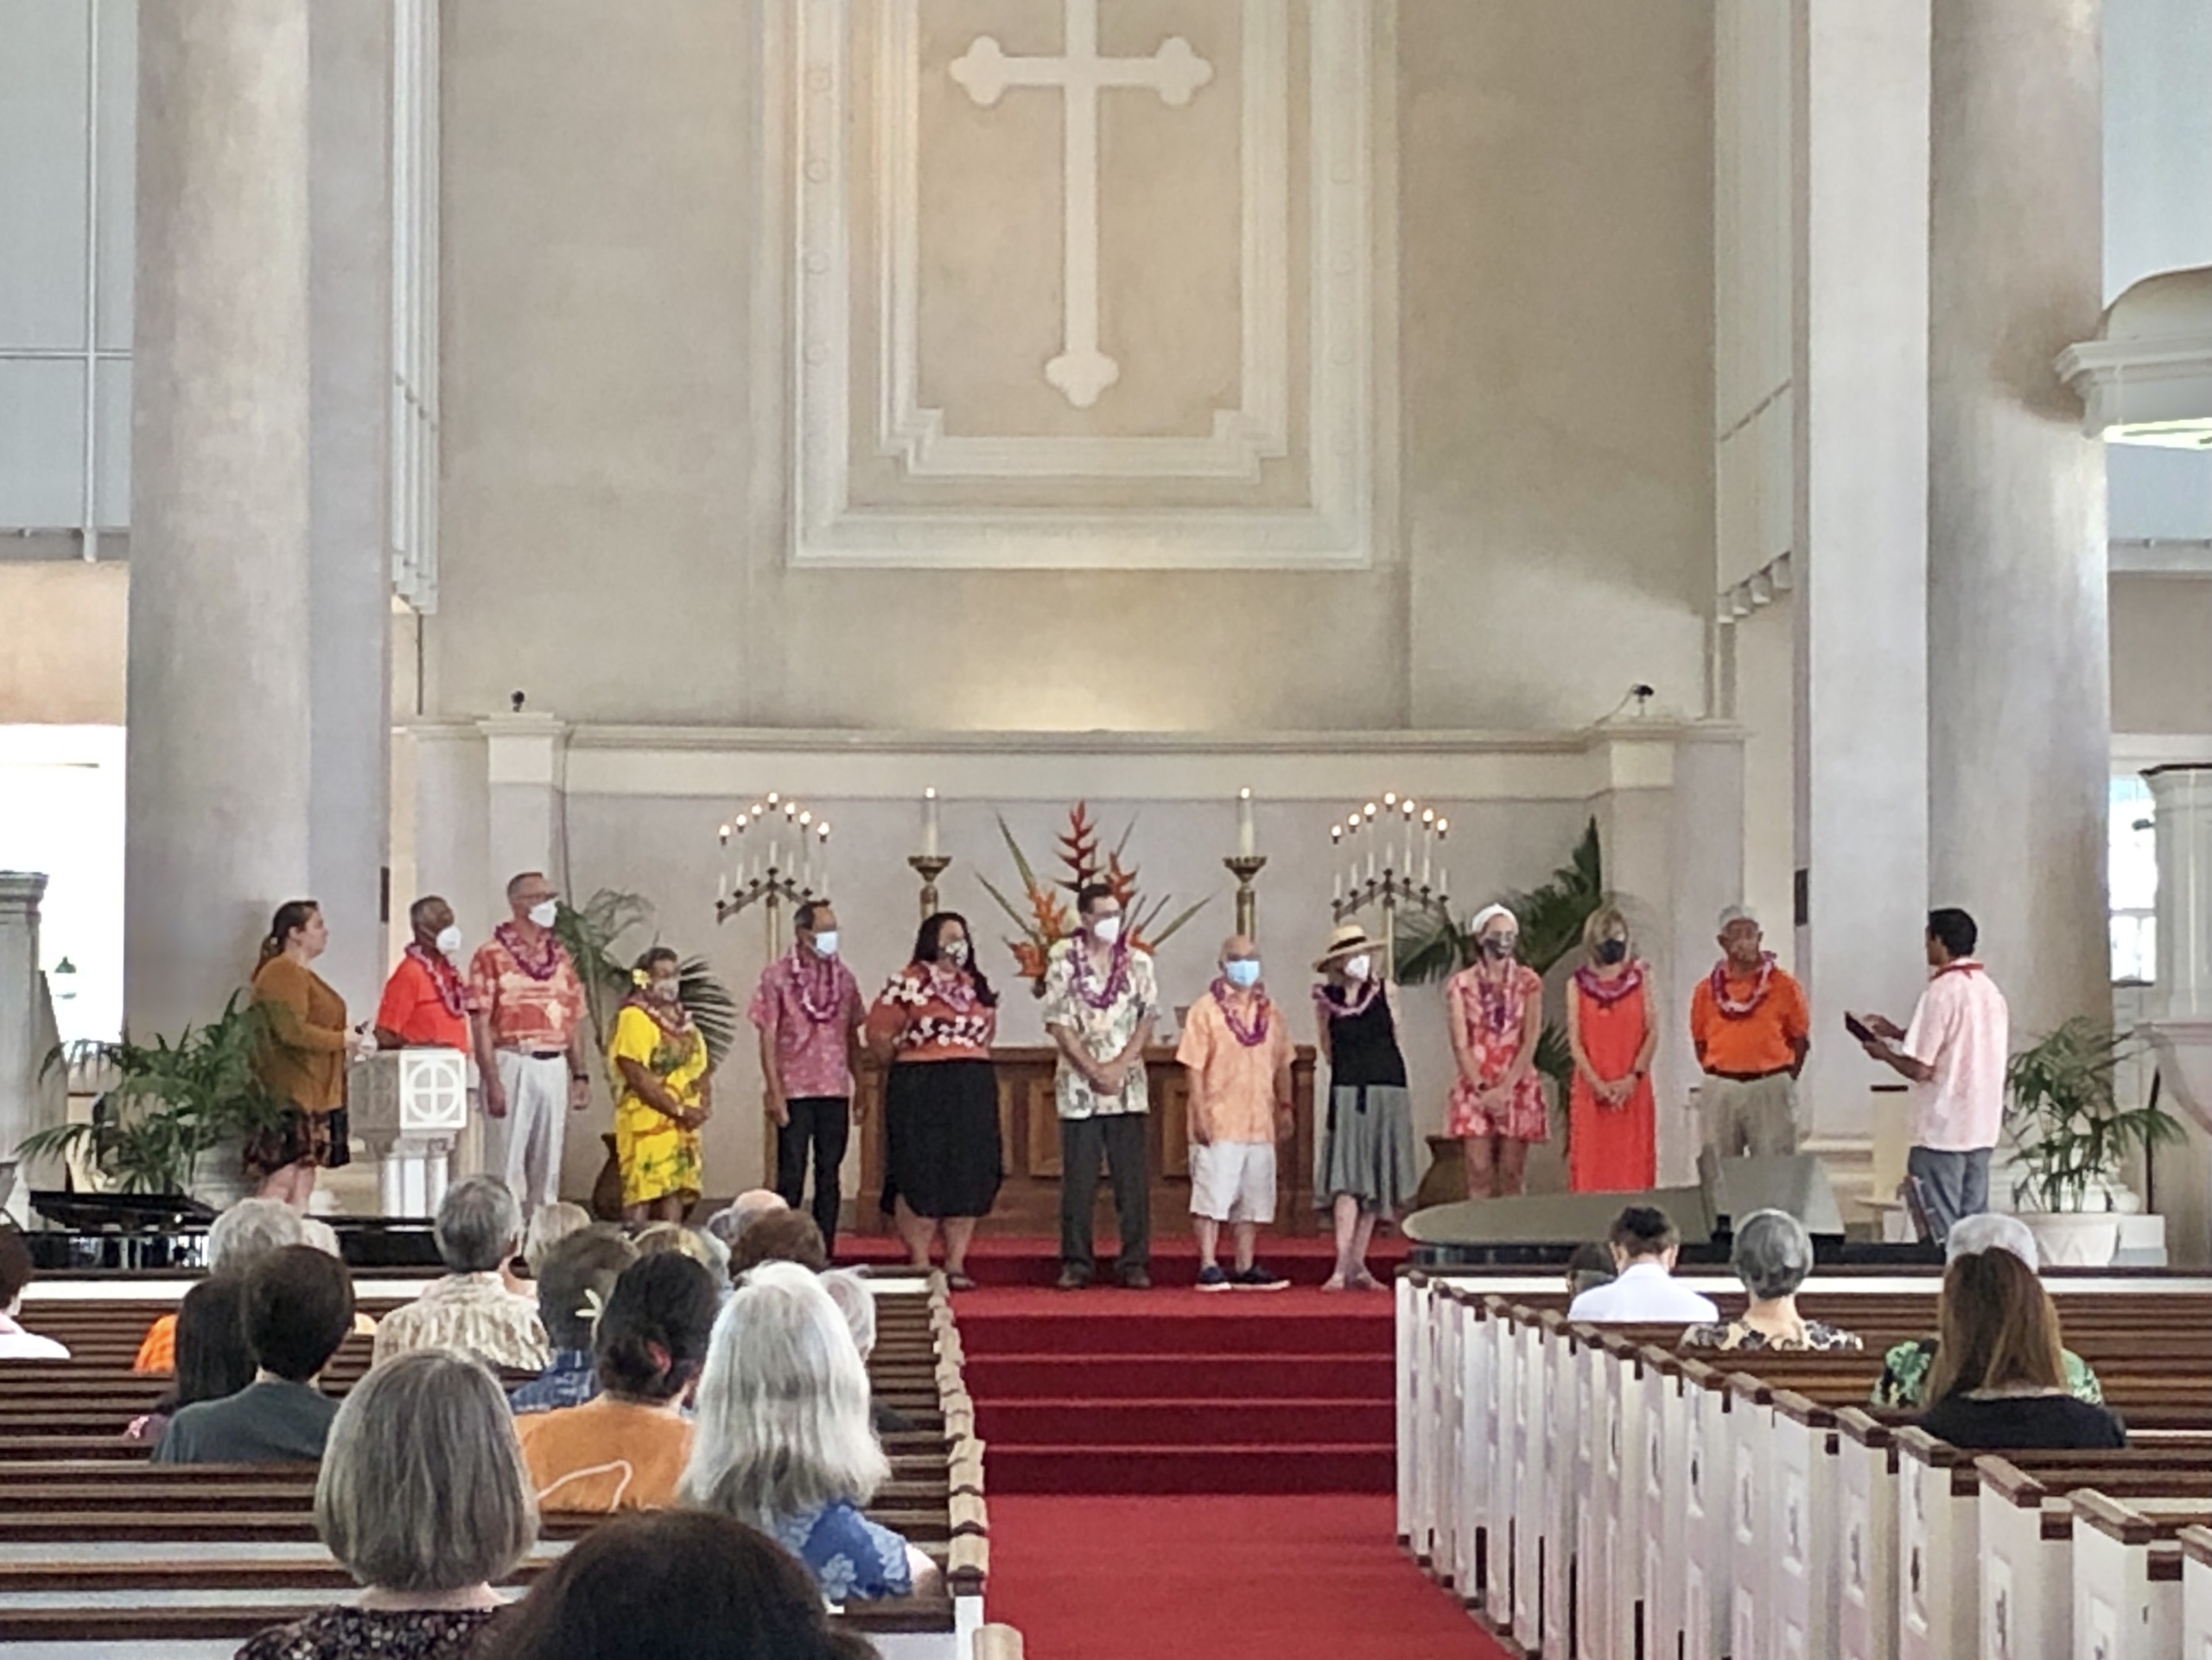 council members stand before the congregation to be installed during a Sunday morning service